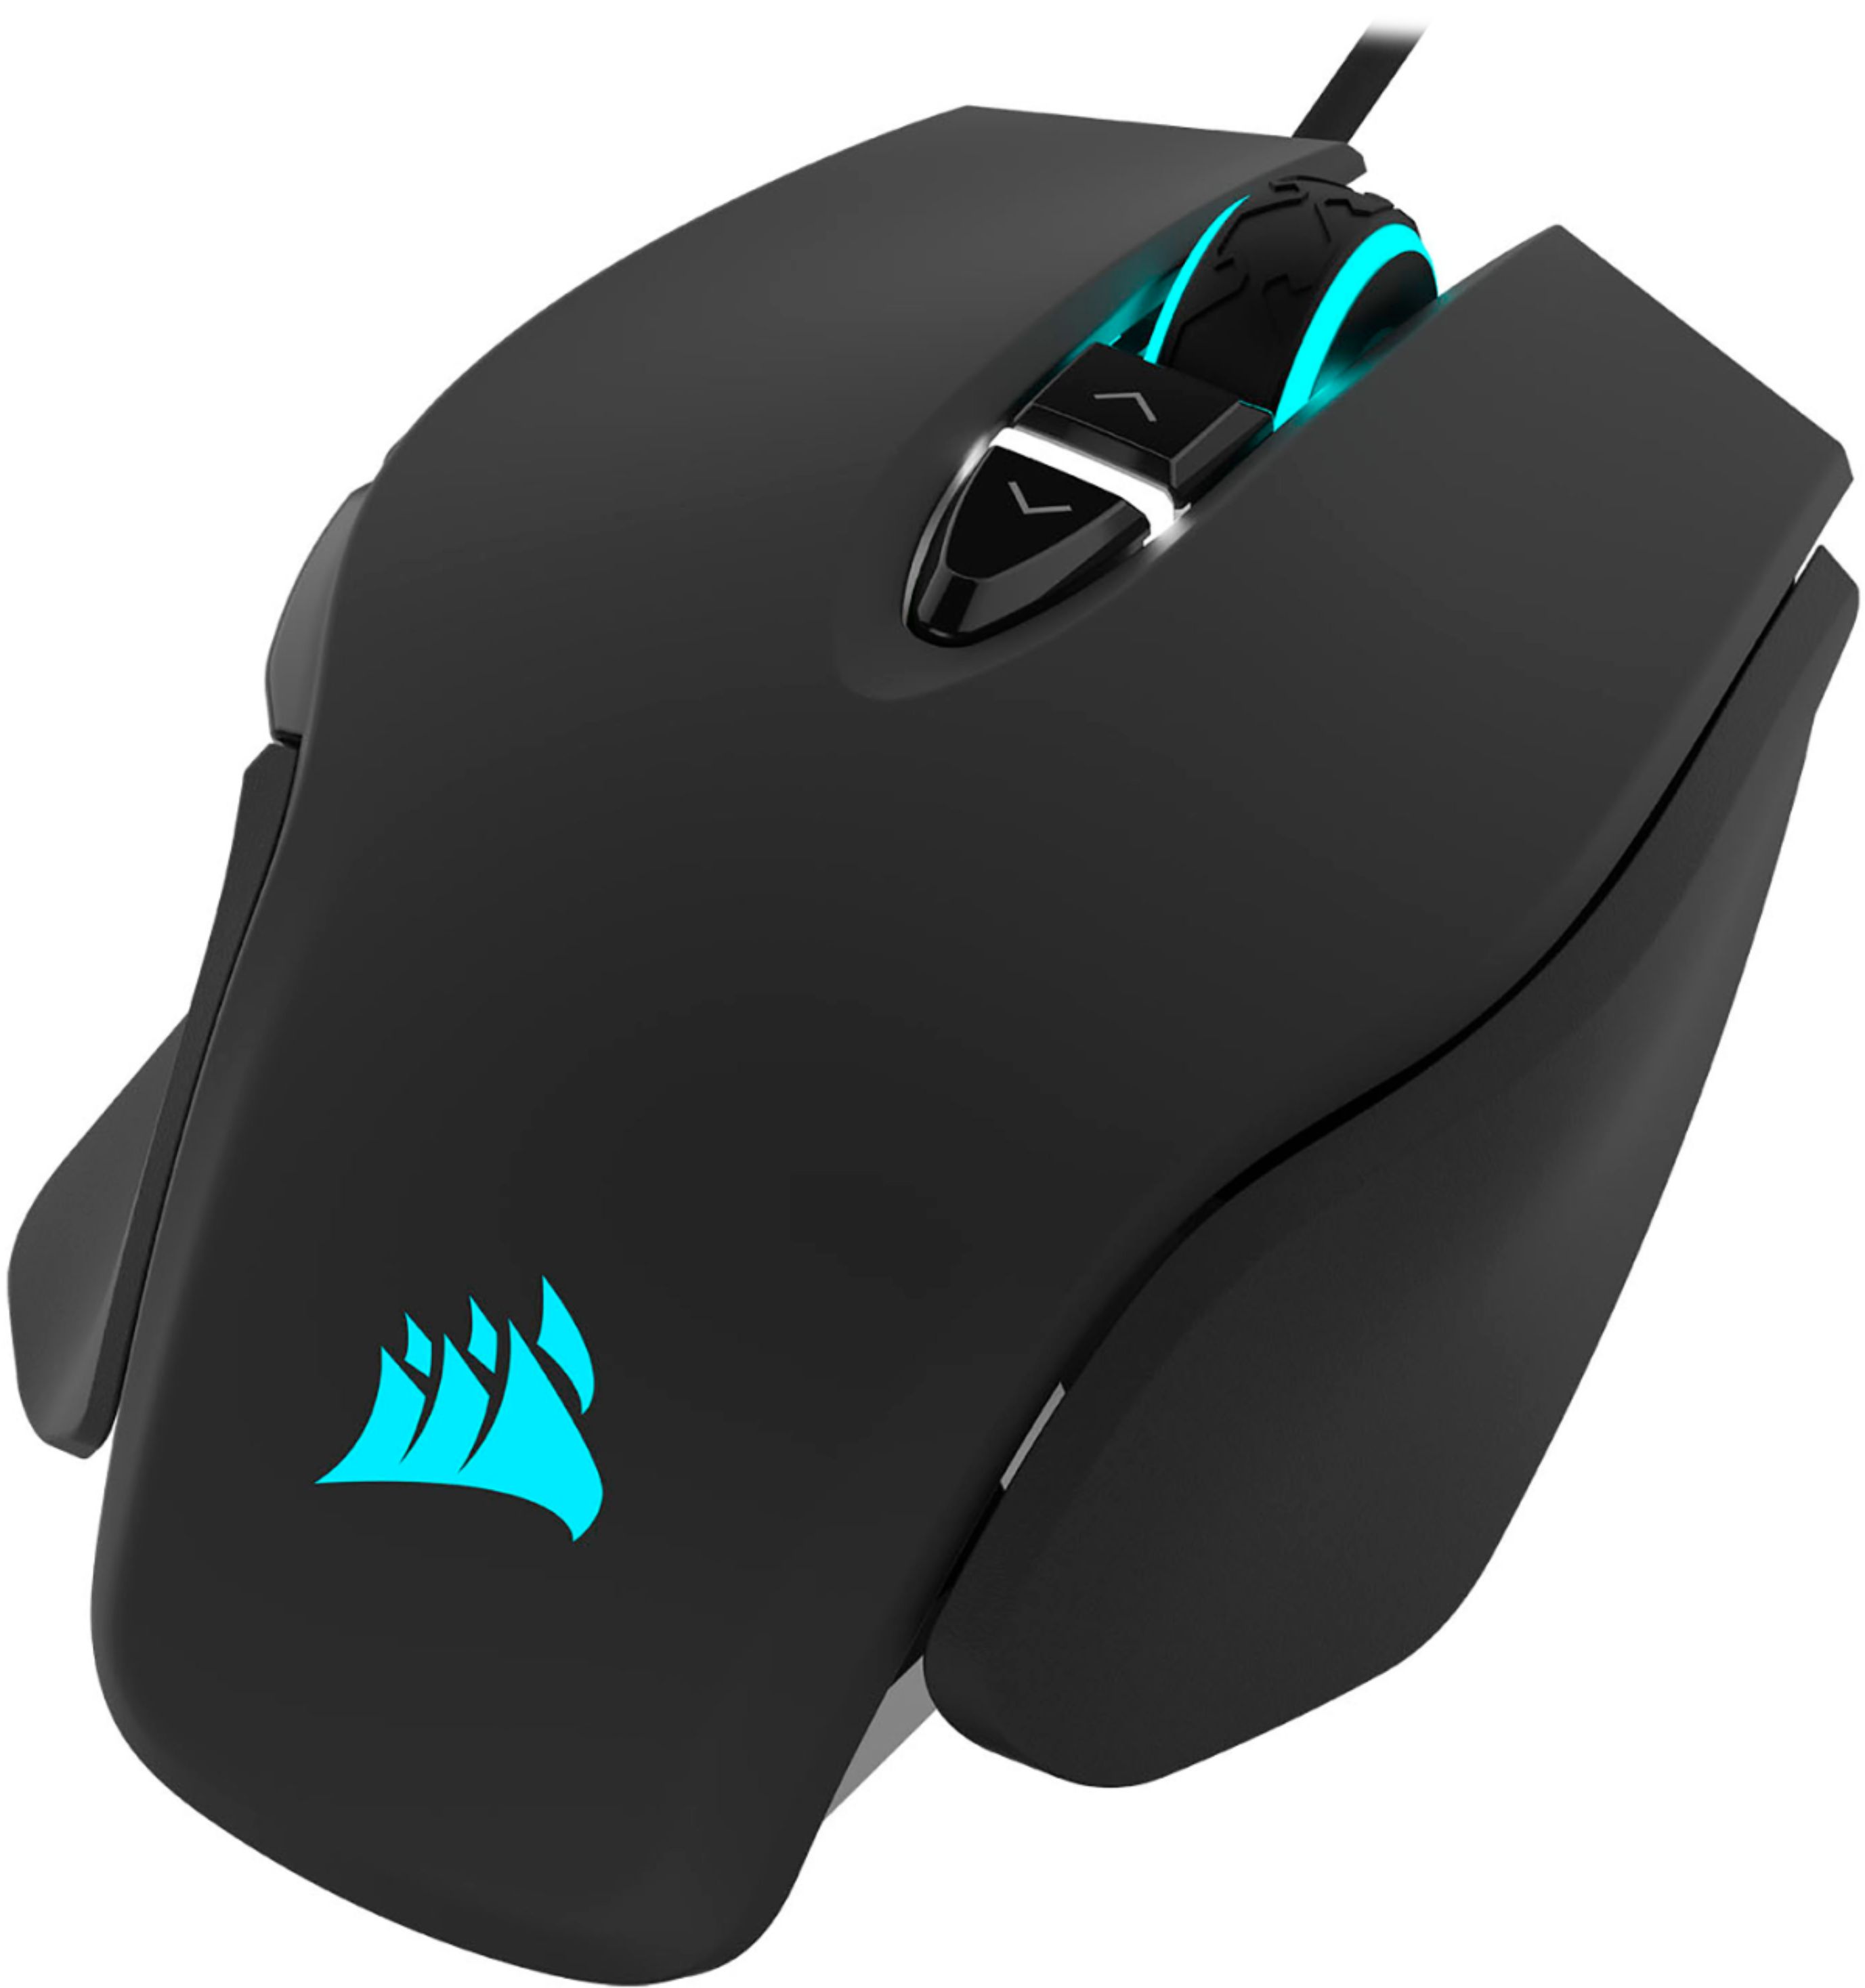 Black Adjustable CORSAIR Mouse FPS Buy: Wired Best Optical Tunable Weights RGB M65 Elite CH-9309011-NA with Gaming